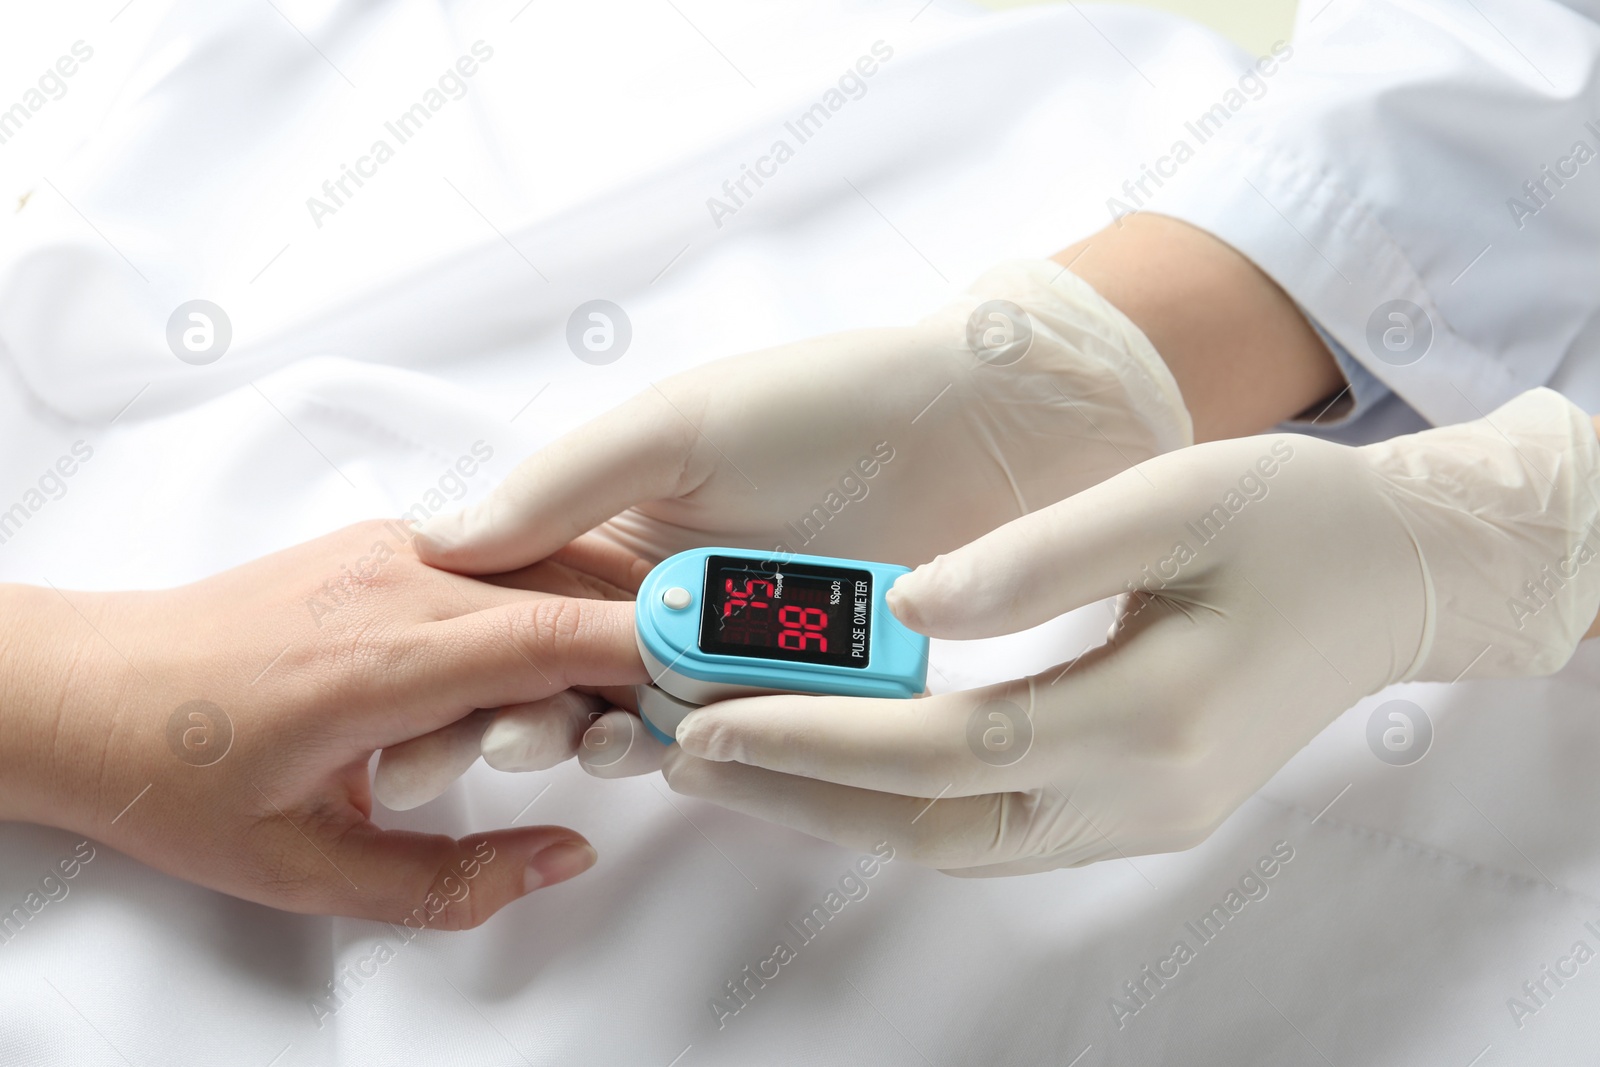 Photo of Doctor examining patient with fingertip pulse oximeter in bed, closeup